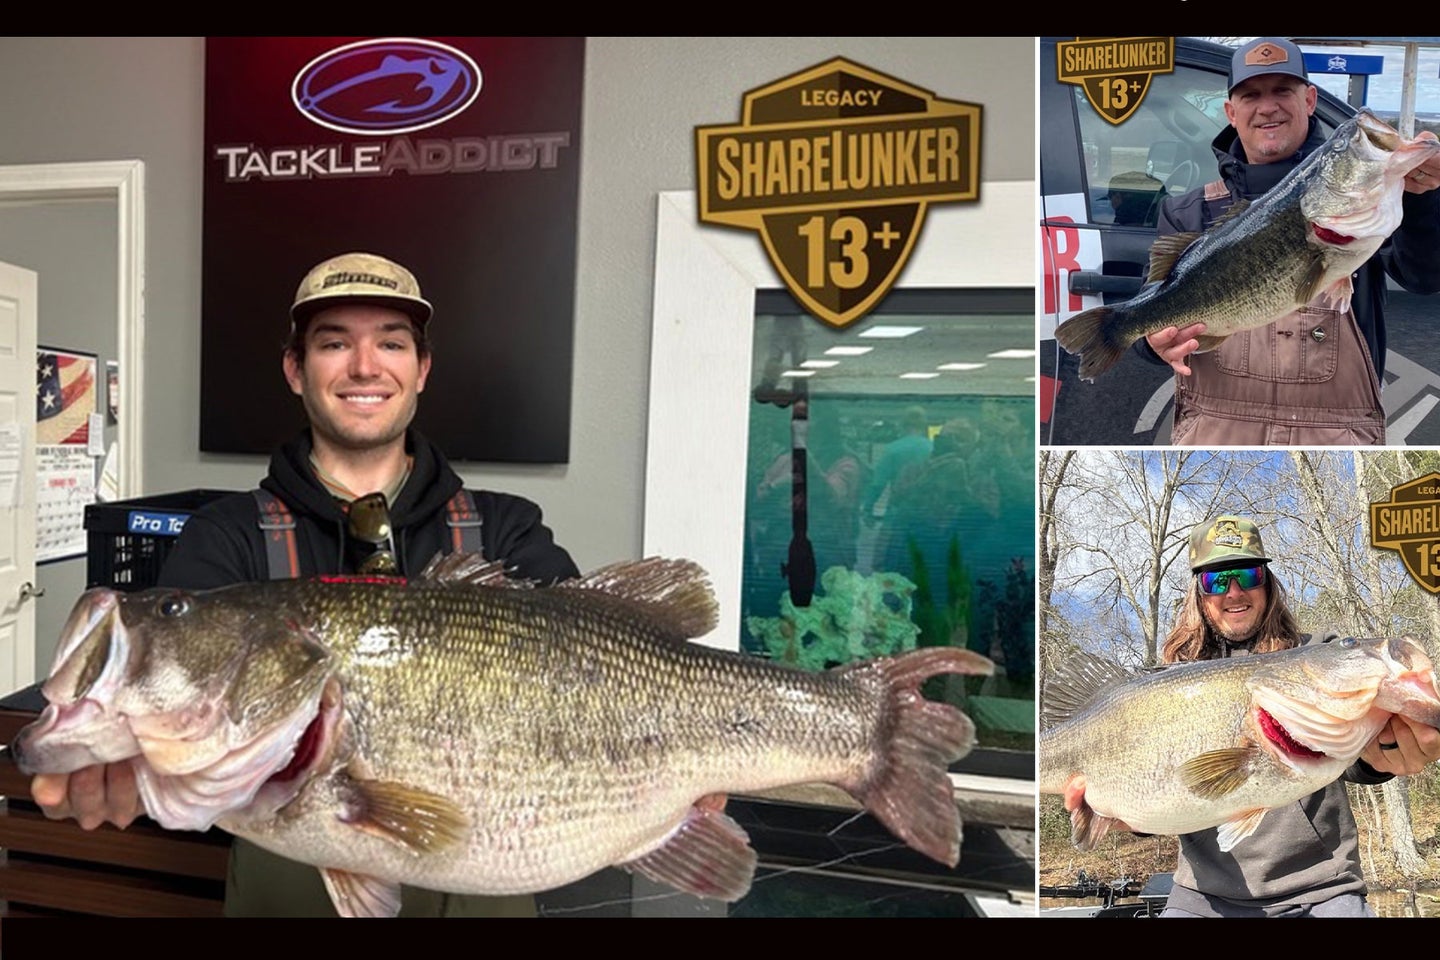 Three 13-Pound Largemouth Bass Caught in One Day in Texas